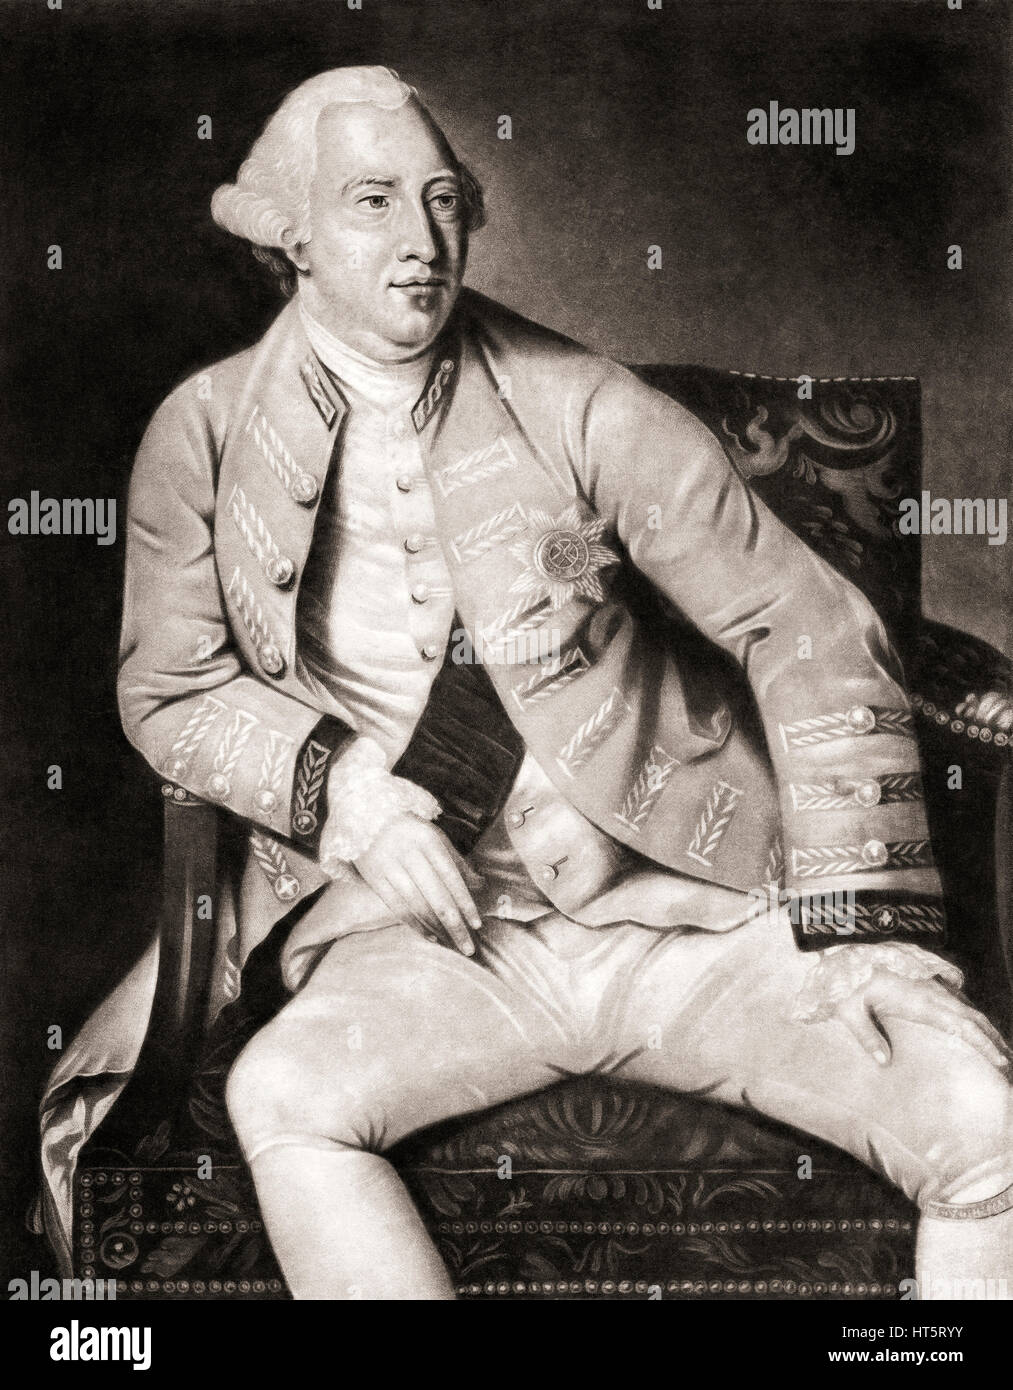 George III, 1738 - 1820. King of the United Kingdom of Great Britain and Ireland.  After an engraving published by Laurie and Whittle of Fleet Street London dated 1794 Stock Photo